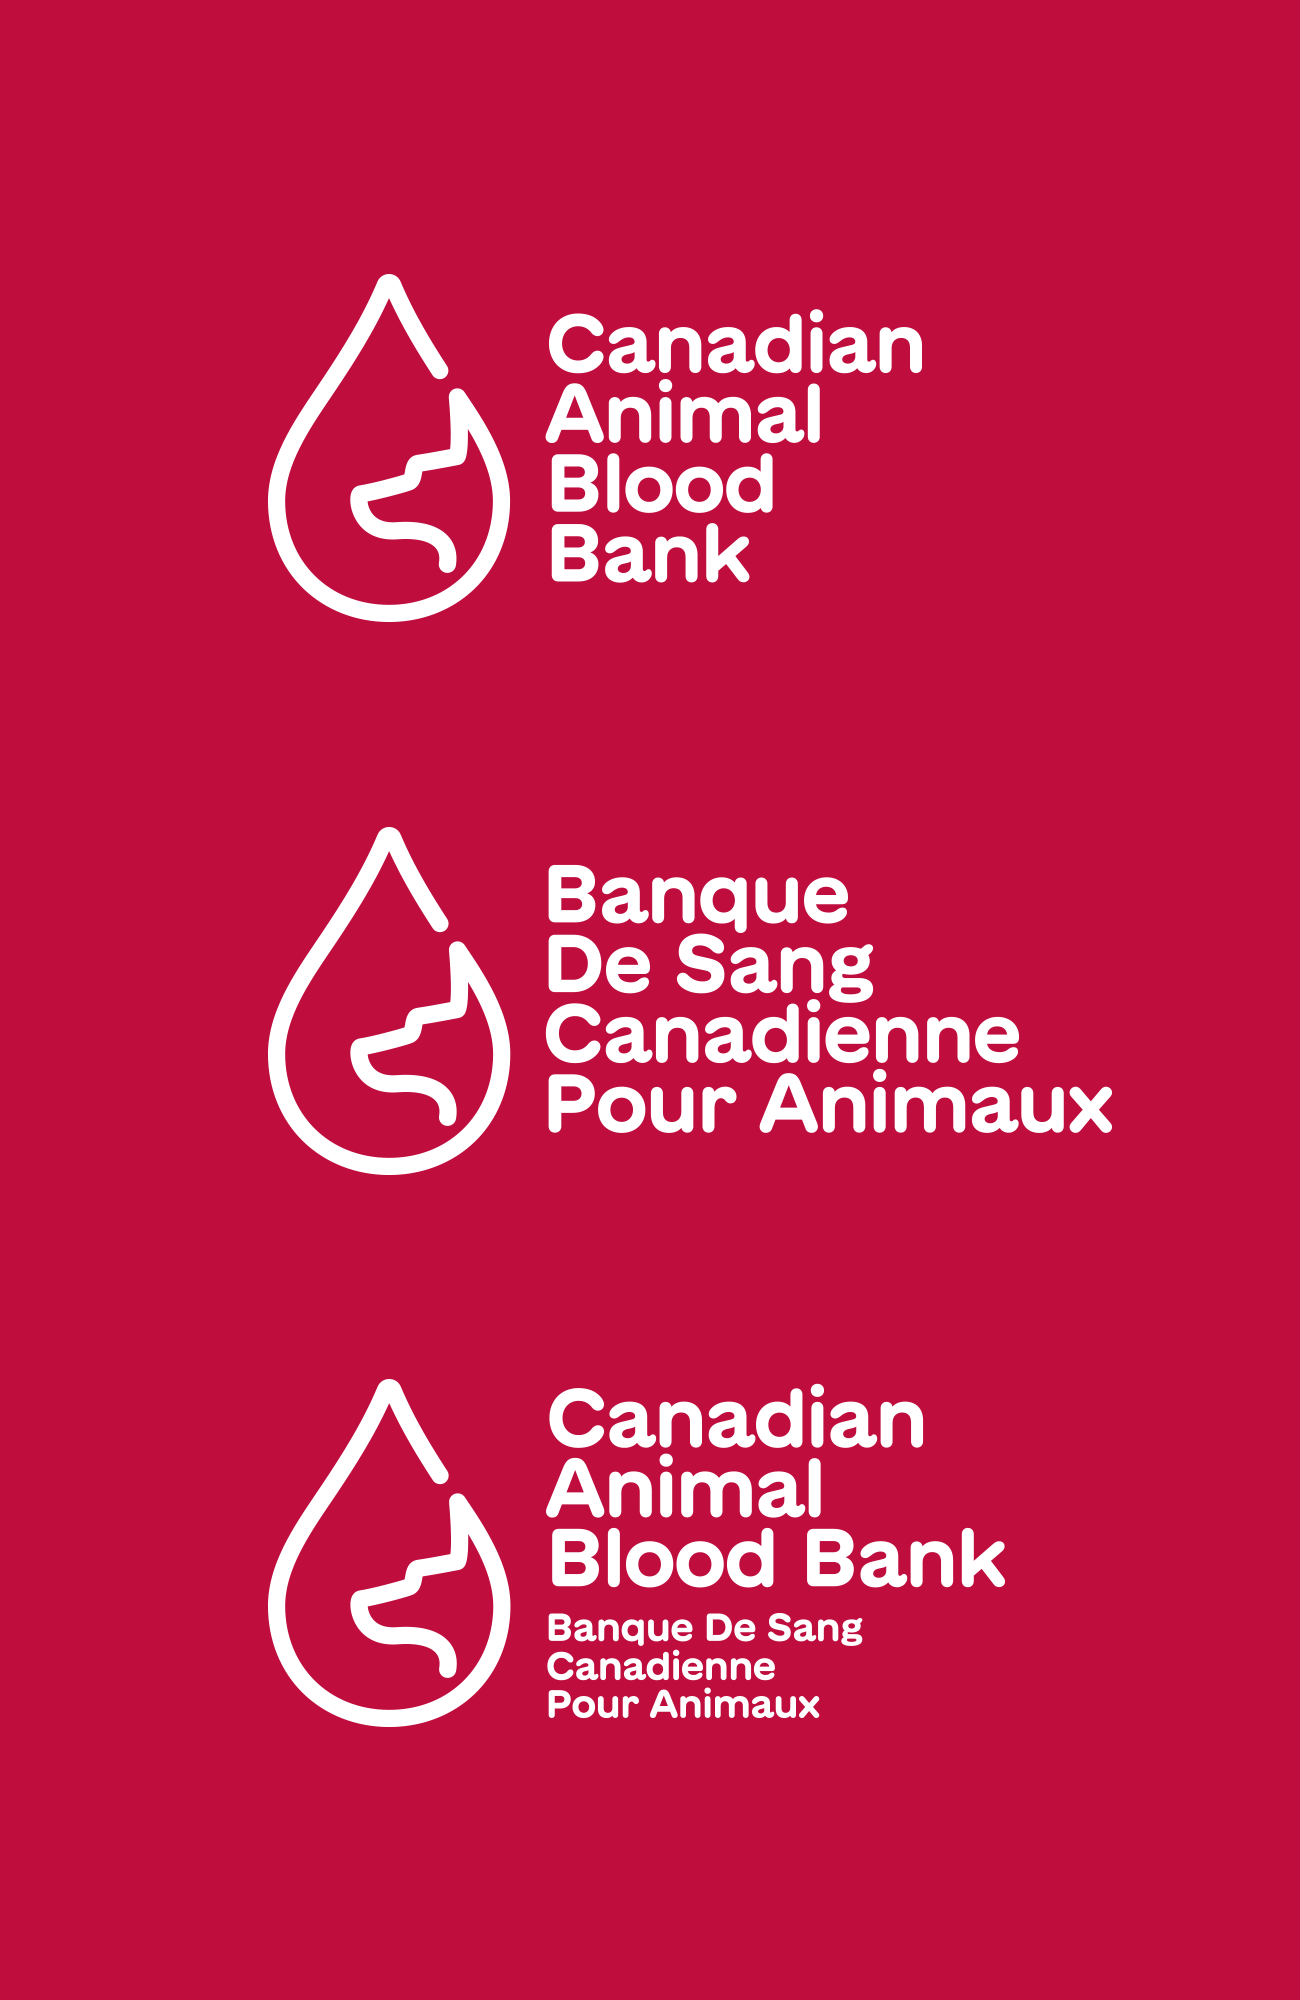 Canadian Animal Blood Bank logos in French and English